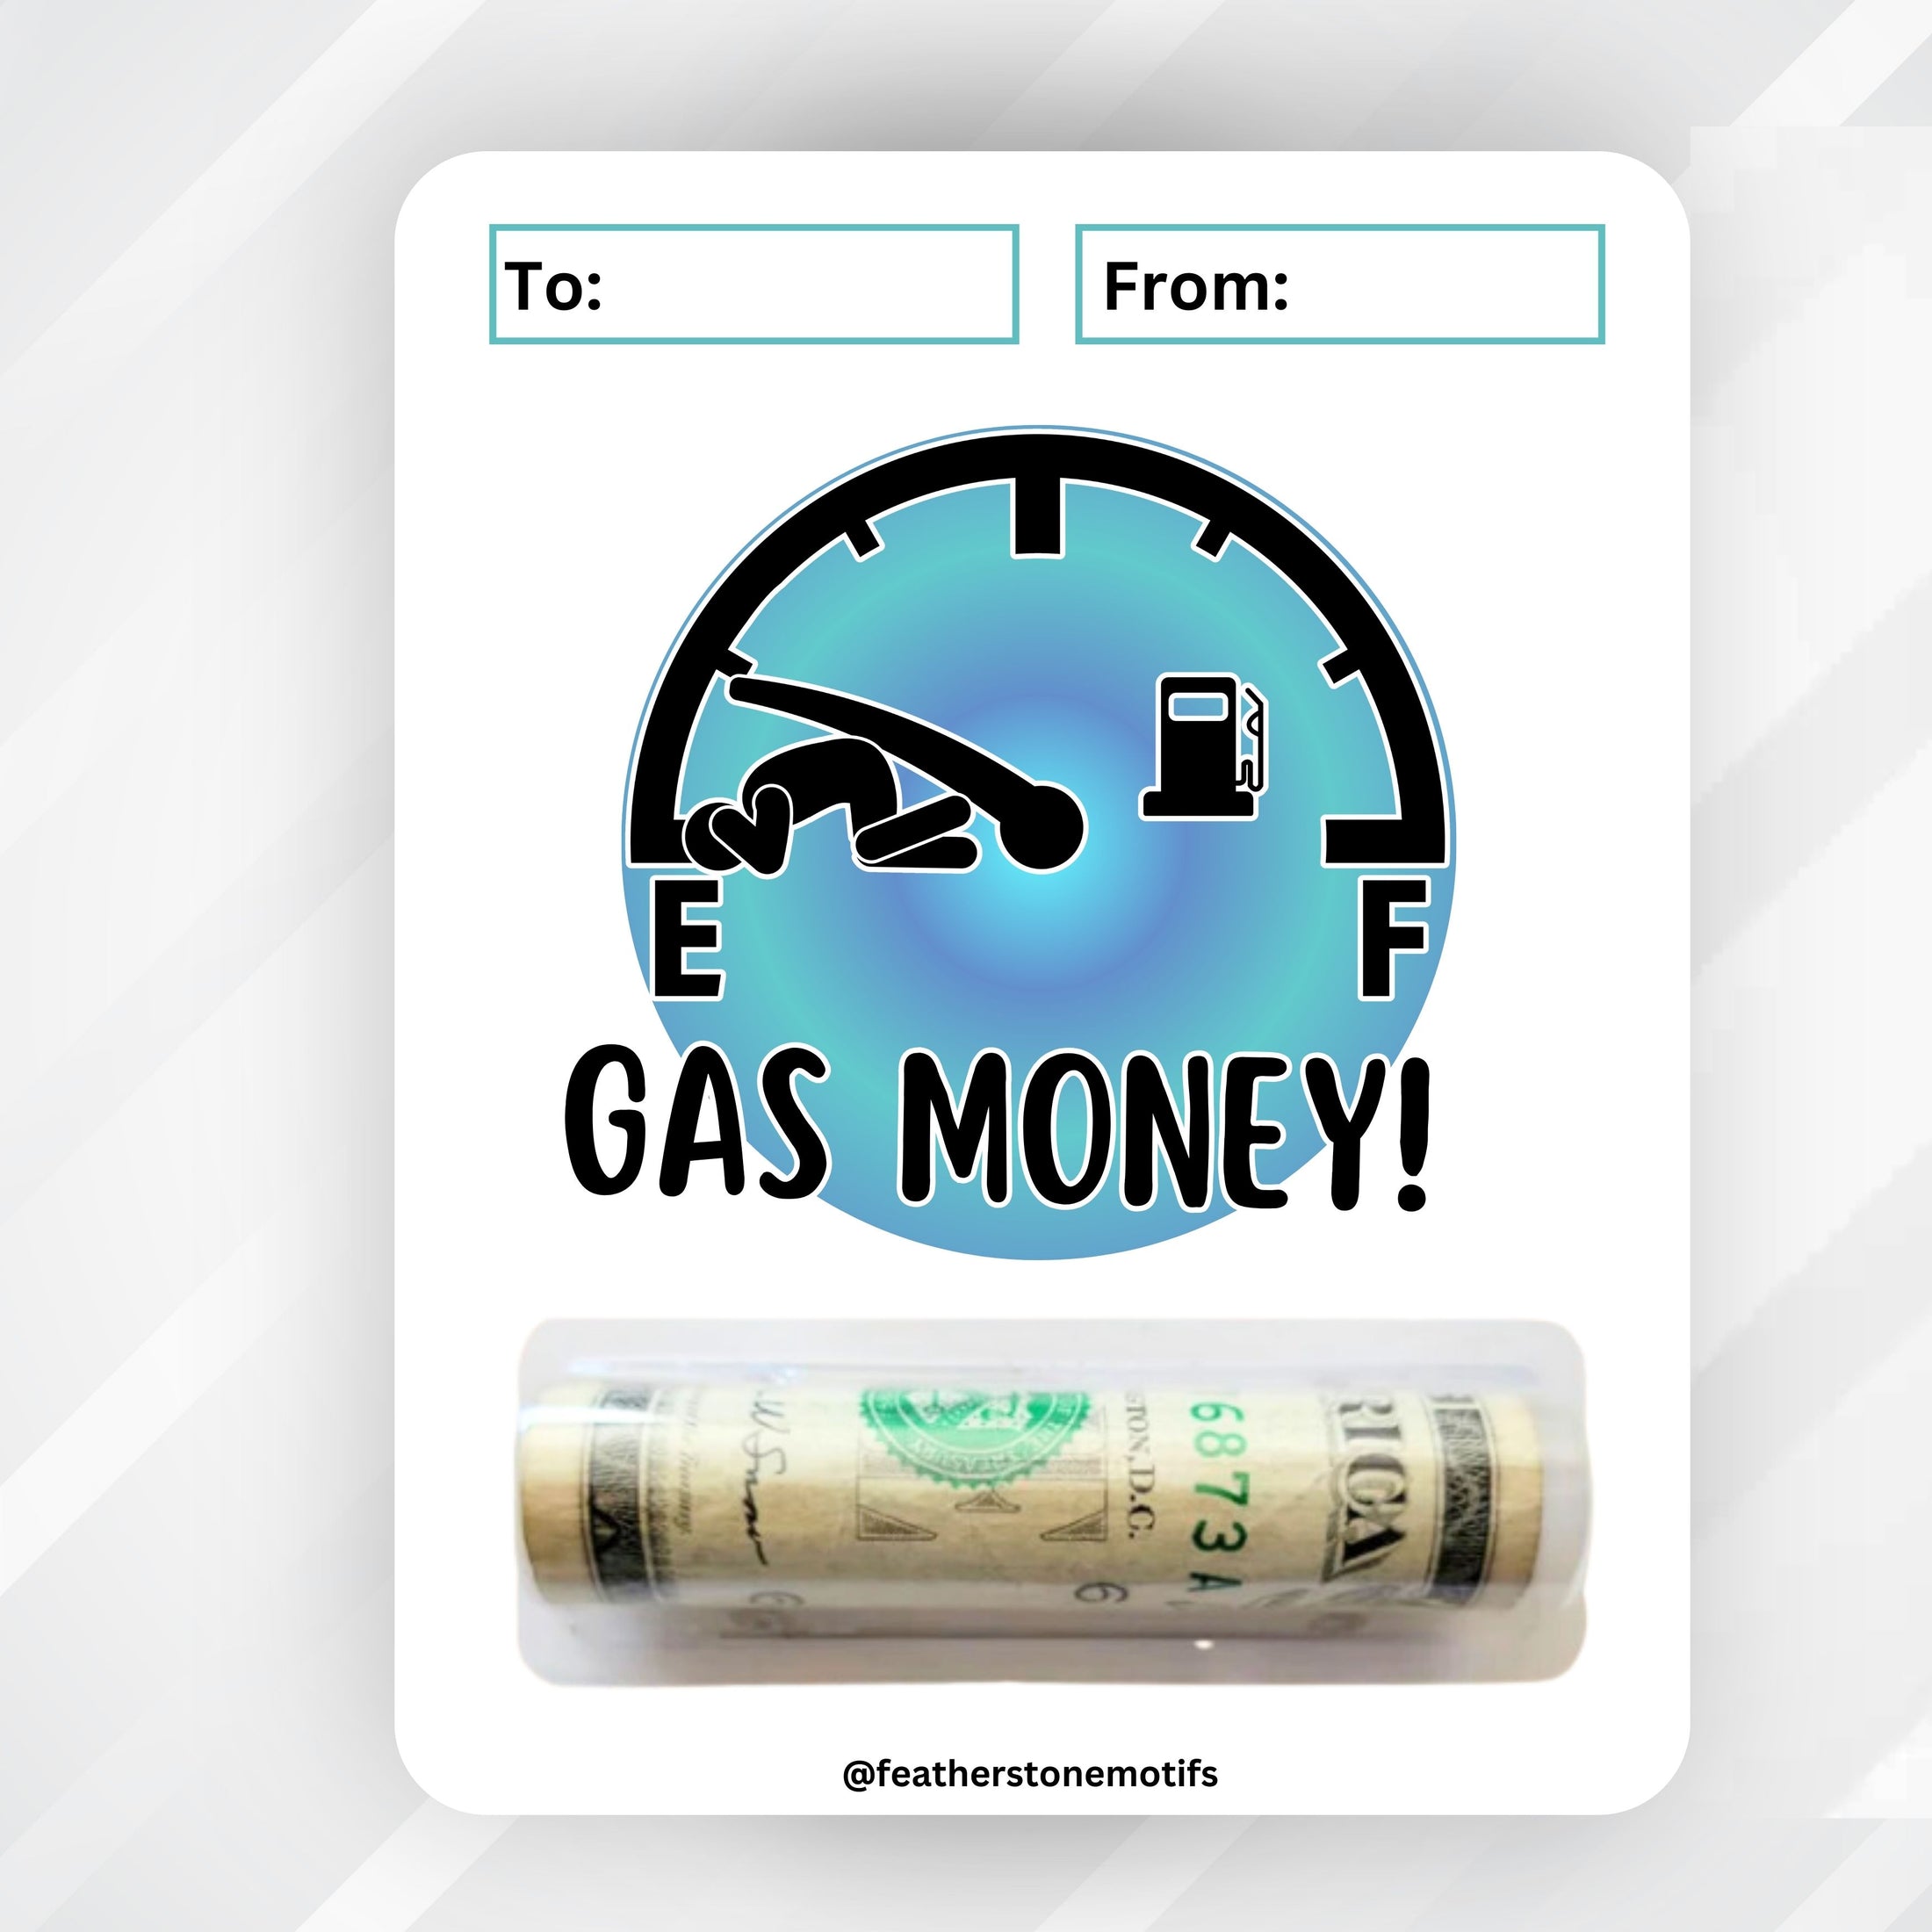 This image shows the money tube attached to the Gas Money 1 Money Card.